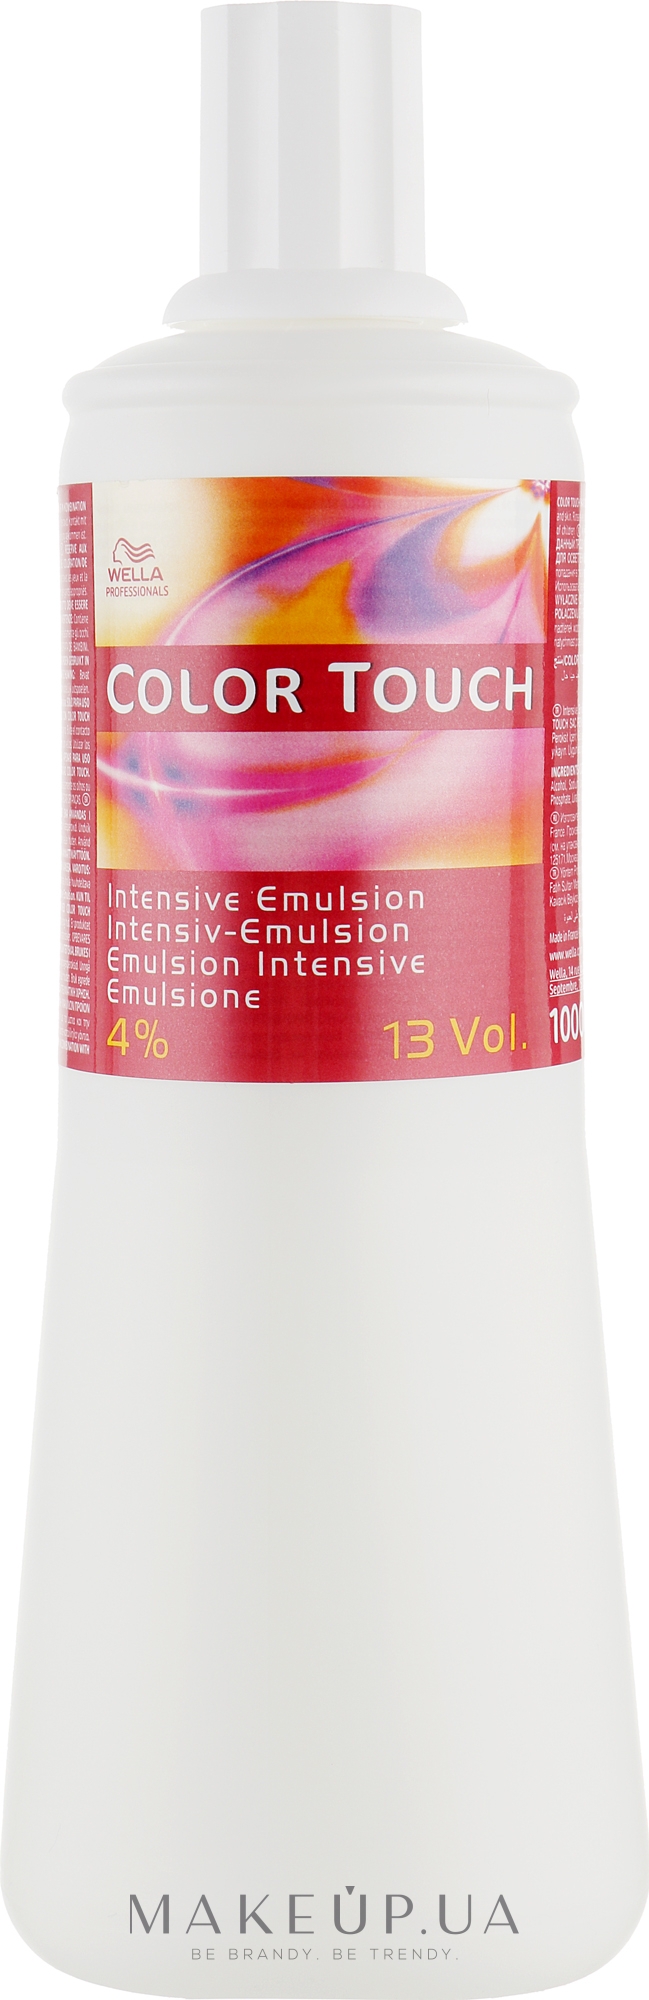 Эмульсия для краски Color Touch - Wella Professionals Color Touch Emulsion 4% — фото 1000ml